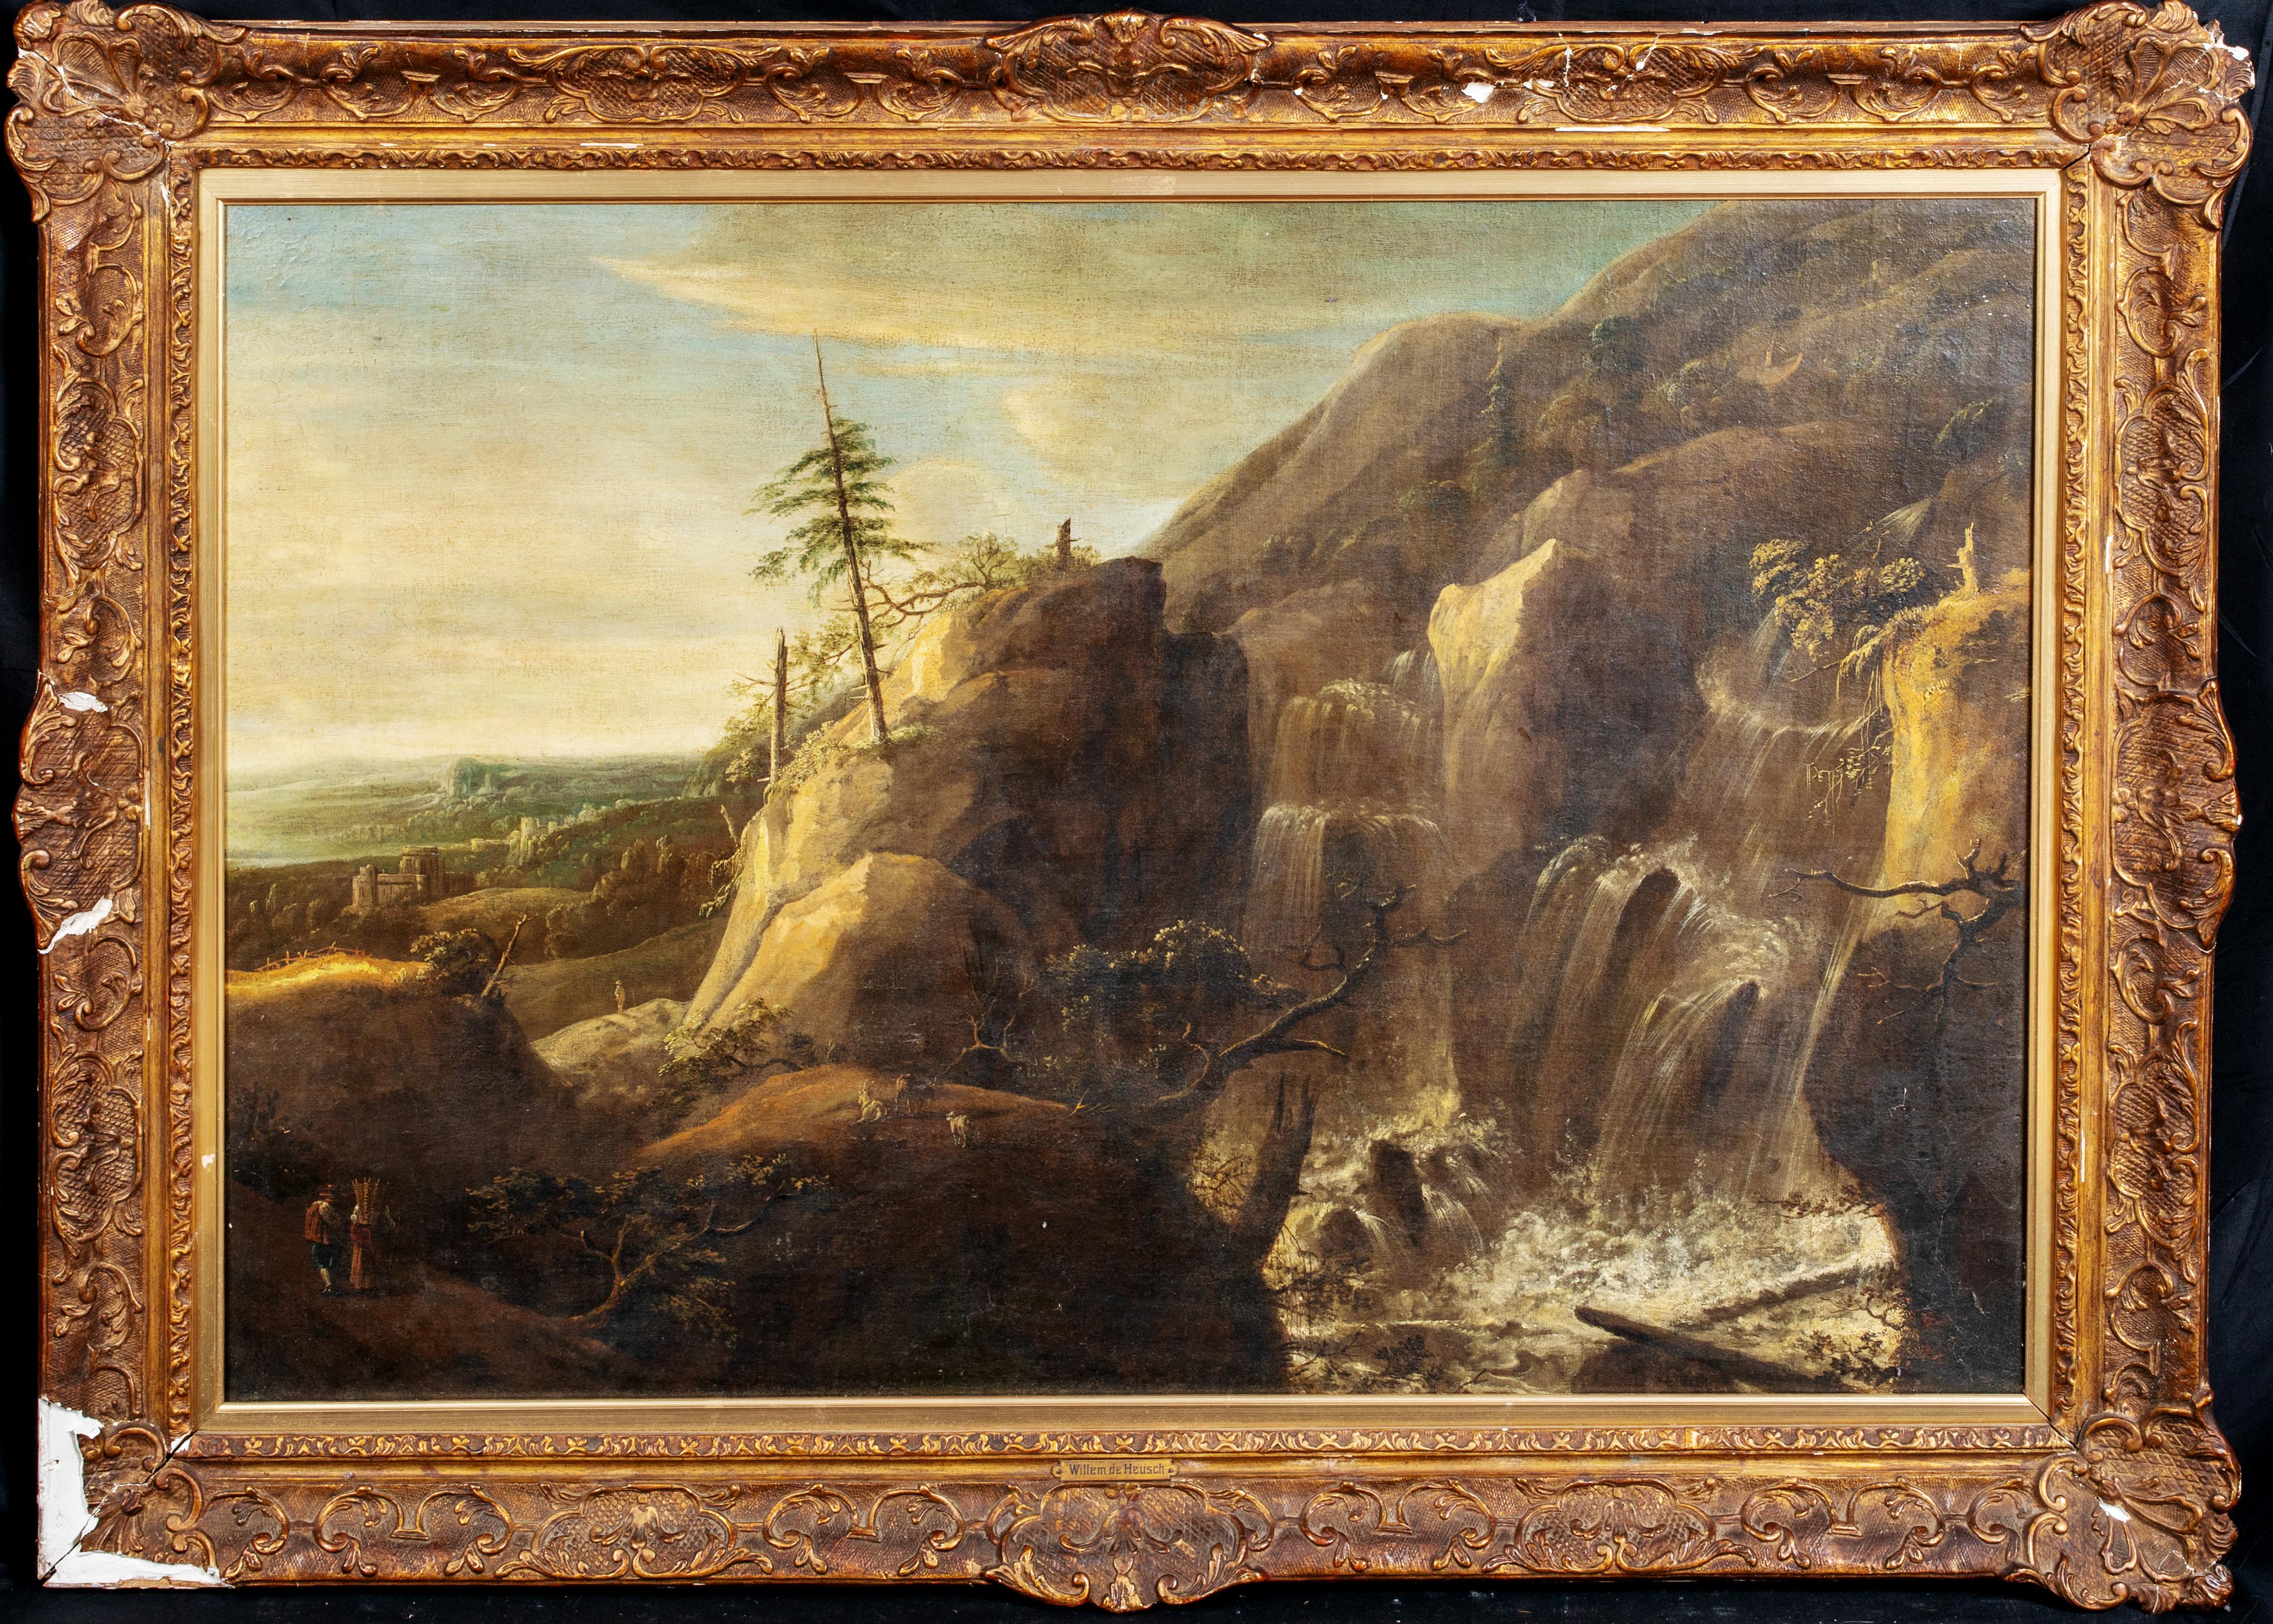 Unknown Landscape Painting - The Hunting Party, 17th Century - School of Simon KICK (1603-1652)